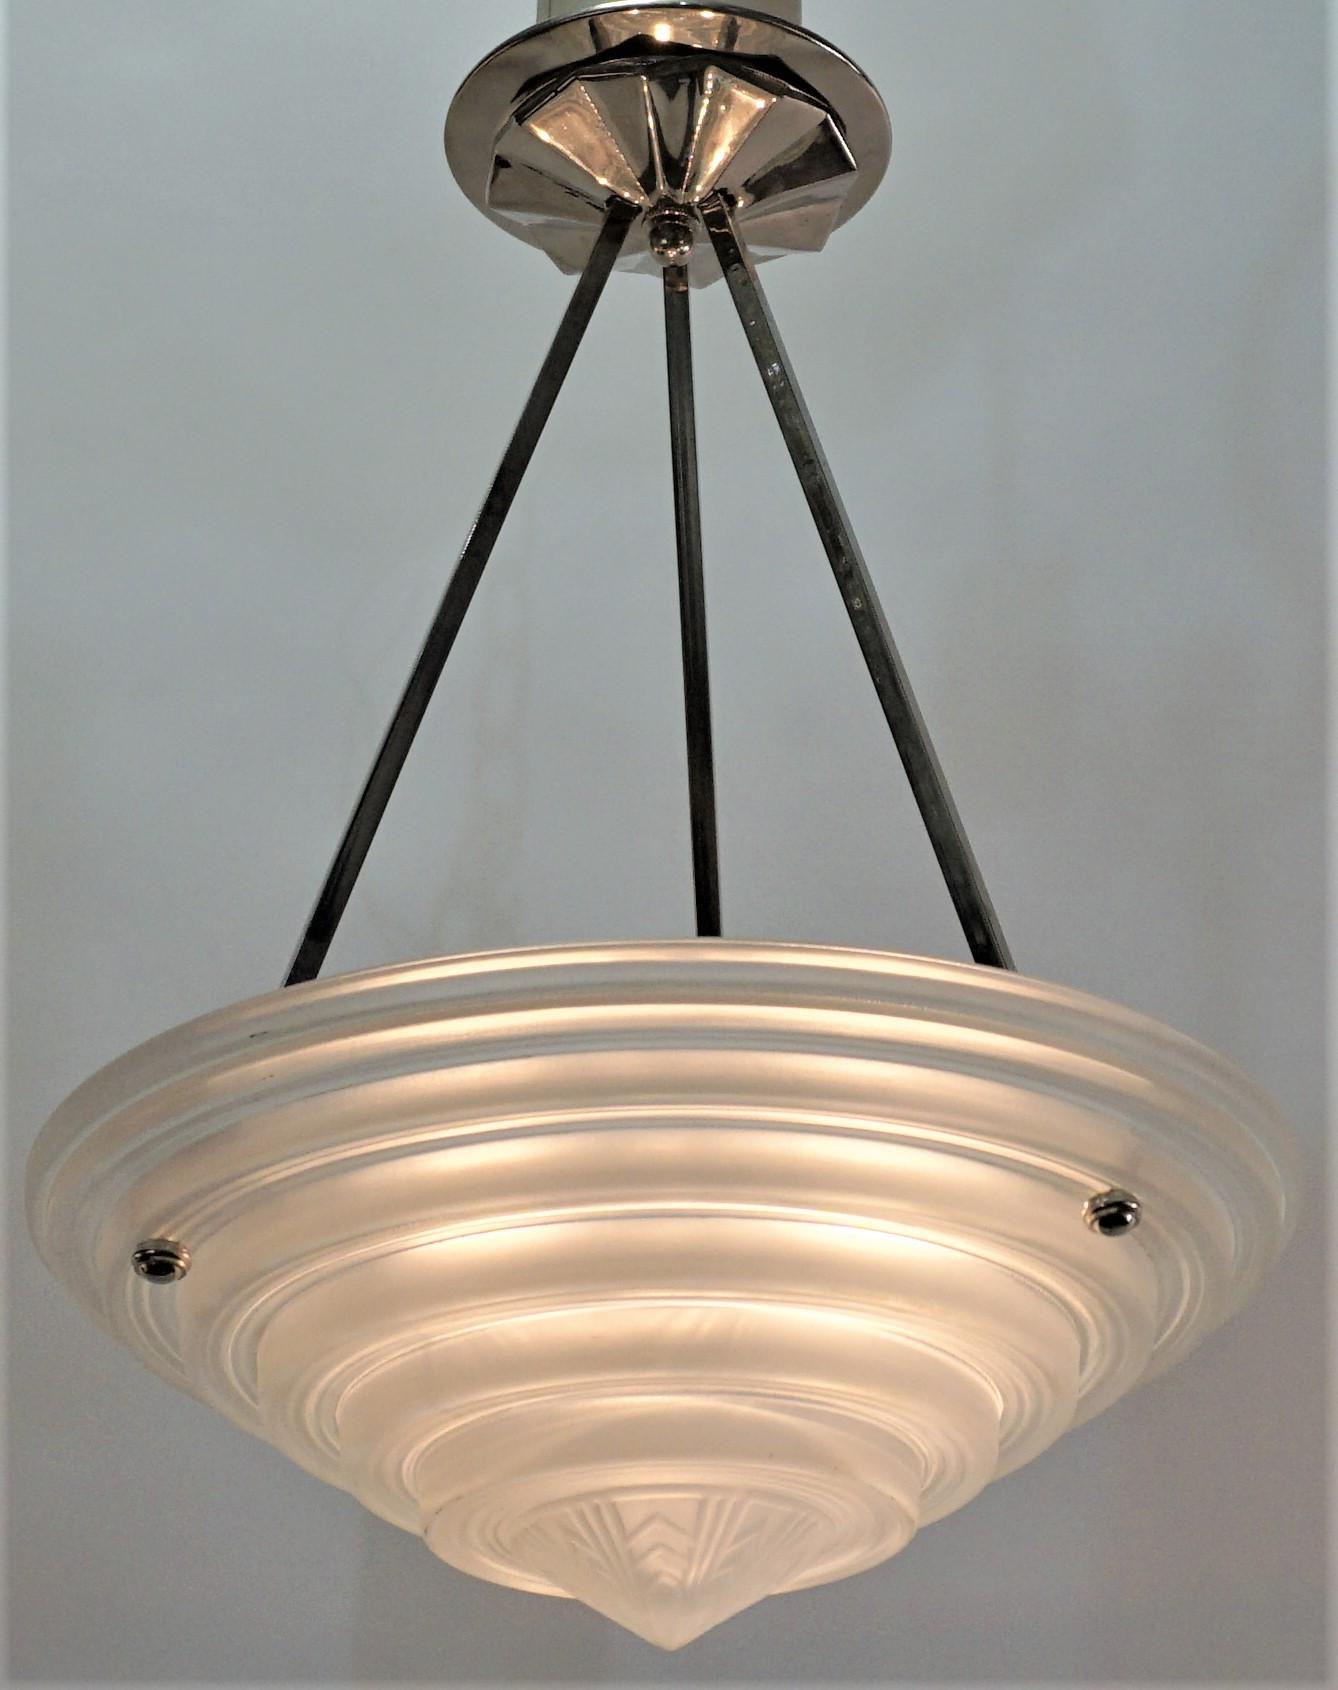 Mid-20th Century French Art Deco Chandelier by G. Leleu